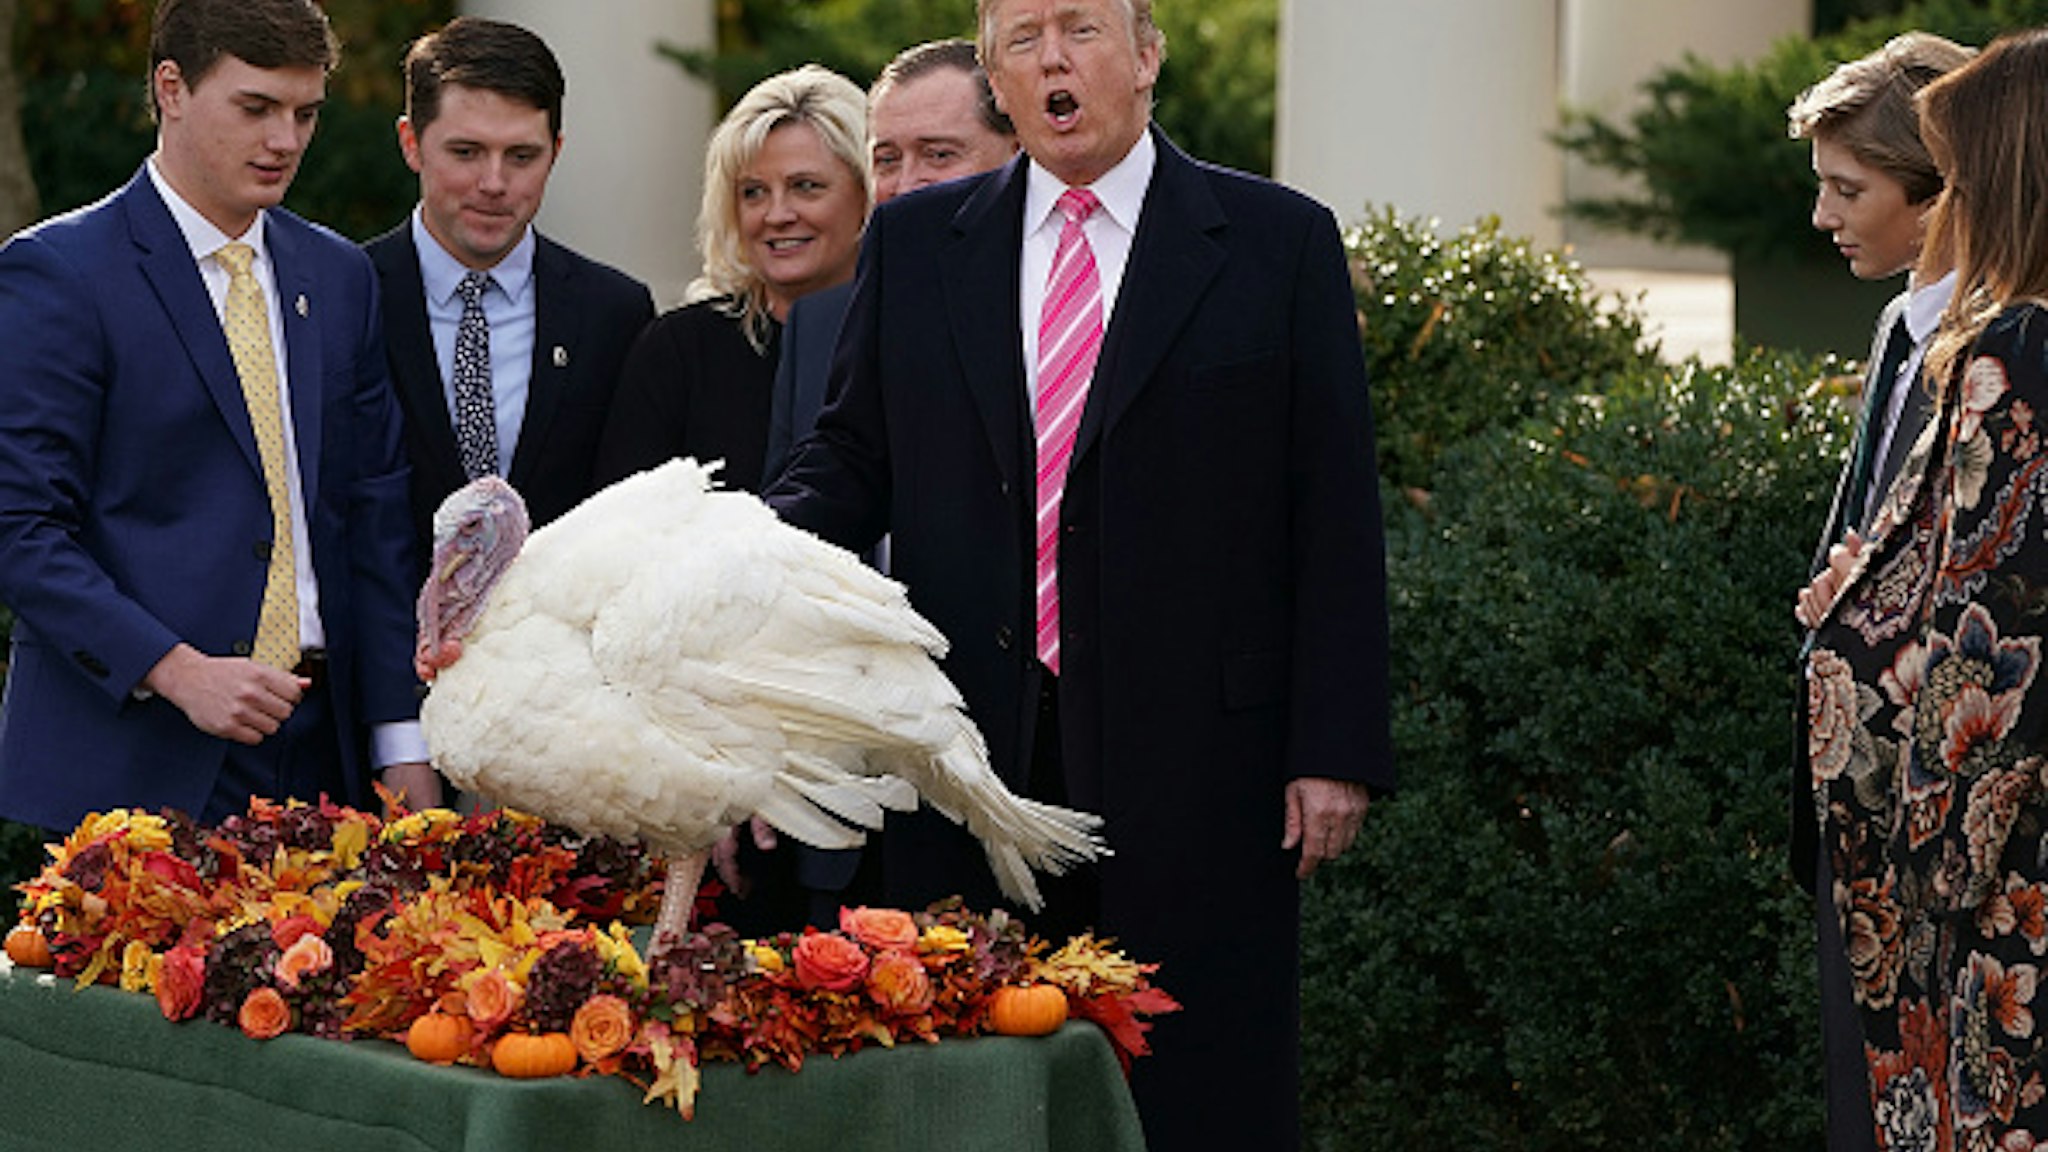 WASHINGTON, DC - NOVEMBER 21: U.S. President Donald Trump pardons the National Thanksgiving Turkey, 'Drumstick,' with National Turkey Federation Chairman Carl Wittenburg and his family in the Rose Garden at the White House November 21, 2017 in Washington, DC. Following the presidential pardon, the 40-pound White Holland breed which was raised by Wittenburg in Minnesota, will then reside at his new home, 'Gobbler's Rest,' at Virginia Tech.